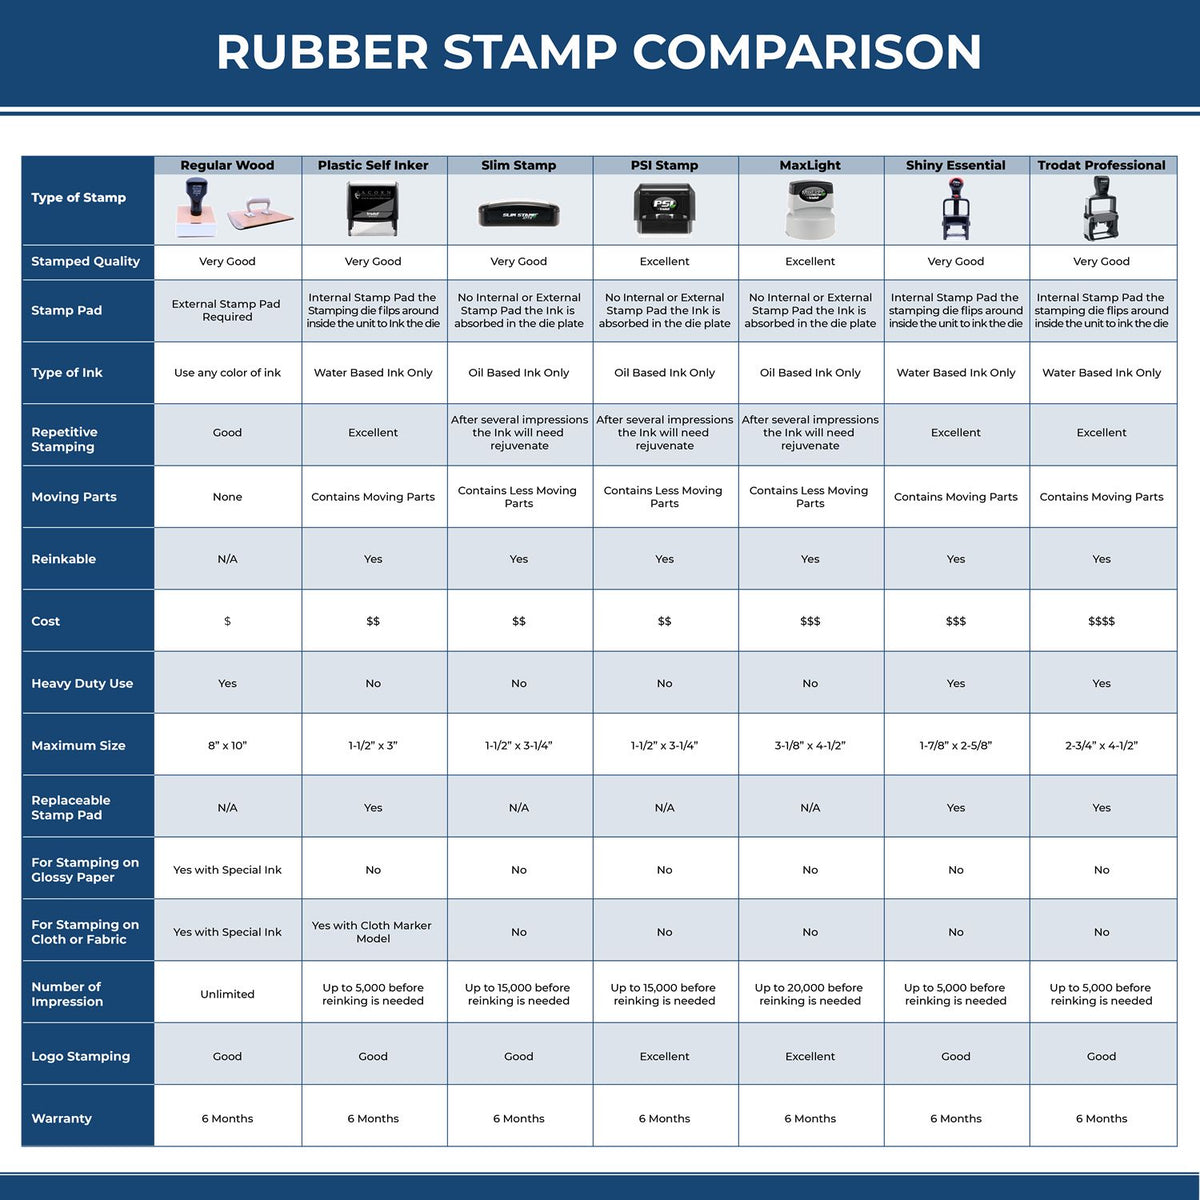 A comparison chart for the different types of mount models available for the Self-Inking Illinois PE Stamp.